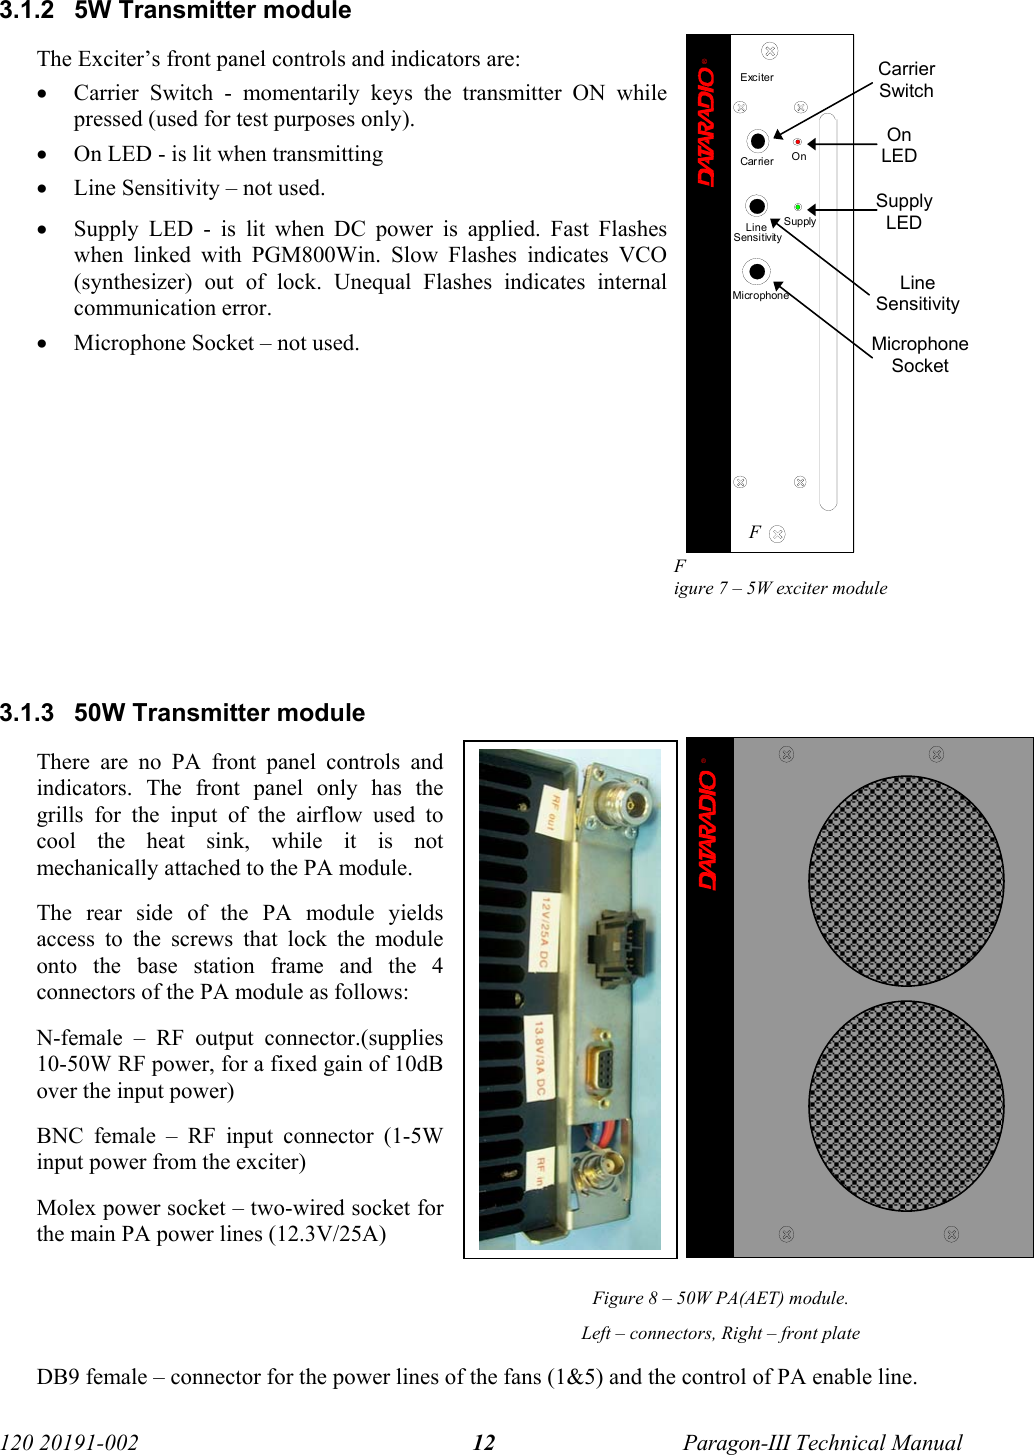   120 20191-002  Paragon-III Technical Manual 123.1.2  5W Transmitter module The Exciter’s front panel controls and indicators are: • Carrier Switch - momentarily keys the transmitter ON while pressed (used for test purposes only). • On LED - is lit when transmitting • Line Sensitivity – not used. • Supply LED - is lit when DC power is applied. Fast Flashes when linked with PGM800Win. Slow Flashes indicates VCO (synthesizer) out of lock. Unequal Flashes indicates internal communication error. • Microphone Socket – not used.        F Figure 7 – 5W exciter module    3.1.3  50W Transmitter module There are no PA front panel controls and indicators. The front panel only has the grills for the input of the airflow used to cool the heat sink, while it is not mechanically attached to the PA module.  The rear side of the PA module yields access to the screws that lock the module onto the base station frame and the 4 connectors of the PA module as follows: N-female – RF output connector.(supplies 10-50W RF power, for a fixed gain of 10dB over the input power) BNC female – RF input connector (1-5W input power from the exciter)  Molex power socket – two-wired socket for the main PA power lines (12.3V/25A) Figure 8 – 50W PA(AET) module. Left – connectors, Right – front plate DB9 female – connector for the power lines of the fans (1&amp;5) and the control of PA enable line.  Carrier Switch On LED Supply LED Line Sensitivity Microphone Socket ®ExciterCar rier OnLineS en s i t ivit ySupplyMicrophone®